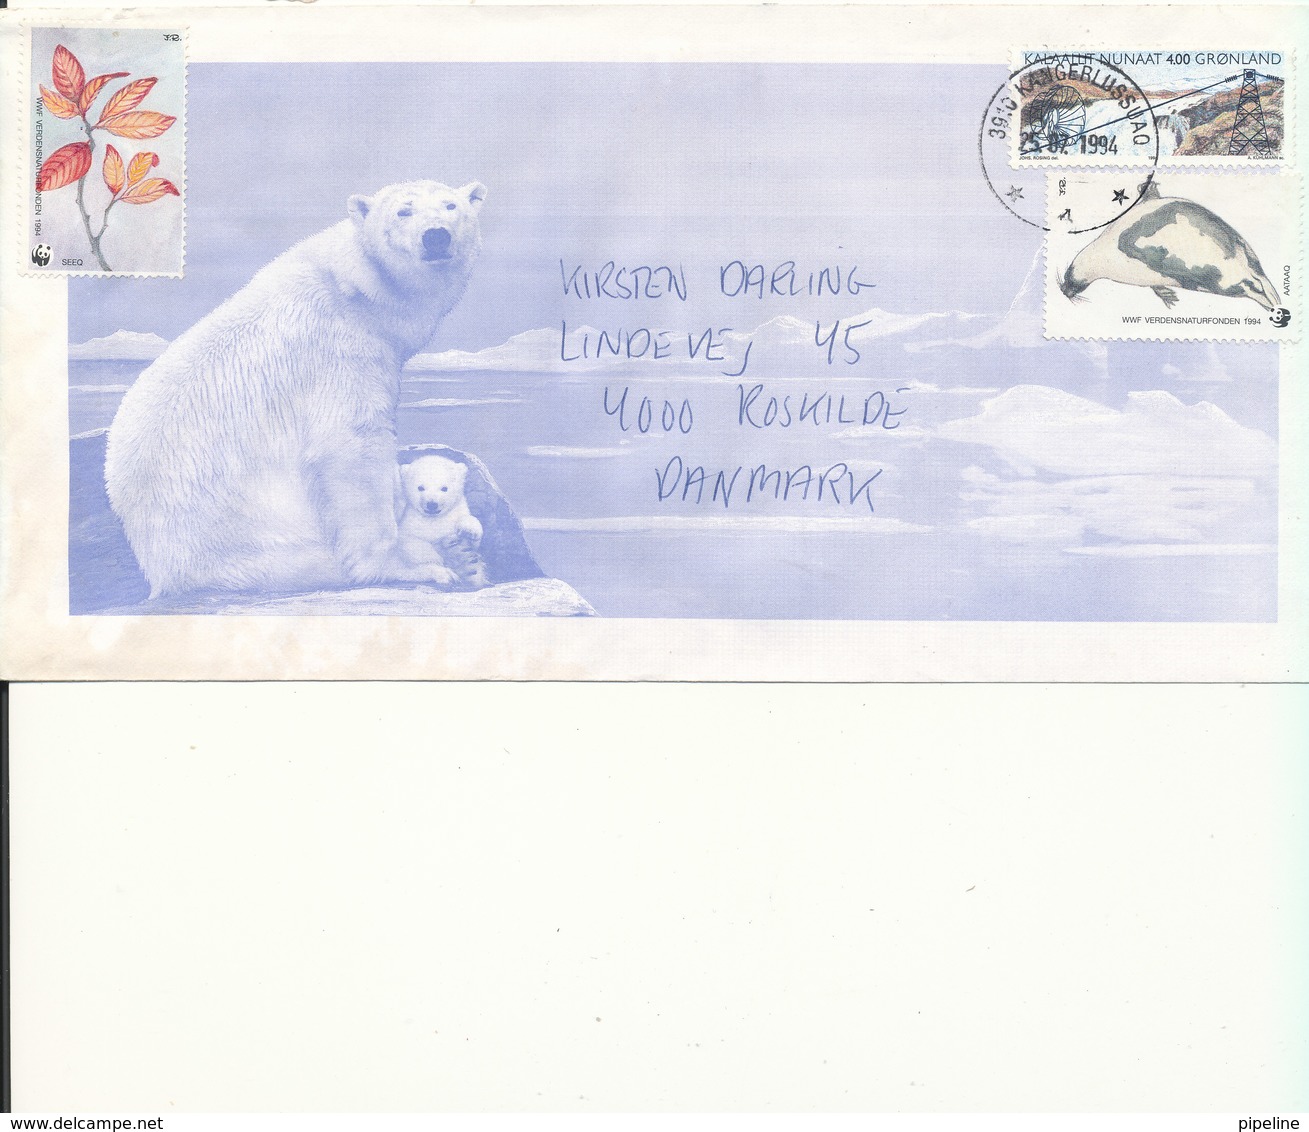 Greenland Nice Cover With Cachet Sent To Denmark Kangerlussuaq 25-7-1994 Single Franked + 2 WWF Panda Seals - Covers & Documents